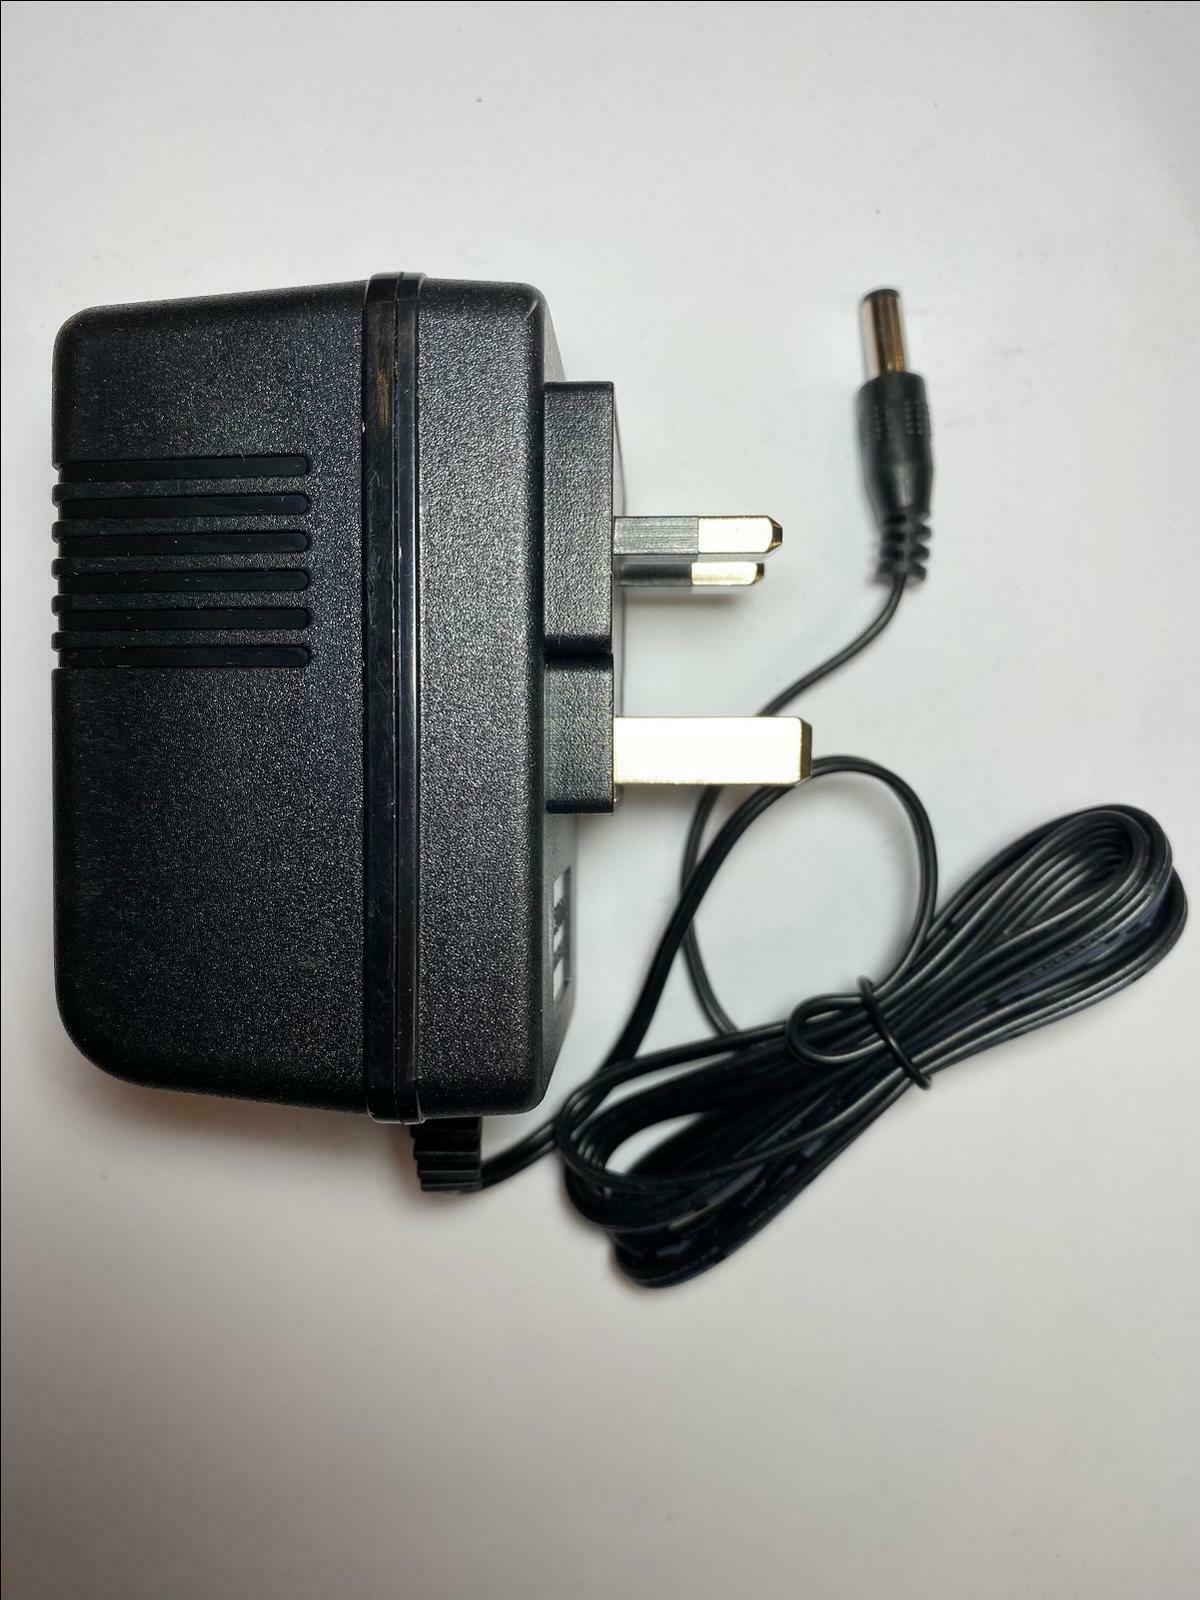 95720-00 9572000 AC Adapter For Spectra Grade Laser Charger LL100 LL400 GL412N-2 GL412N-14 LL500 GL412 GL422 Q102734 Co